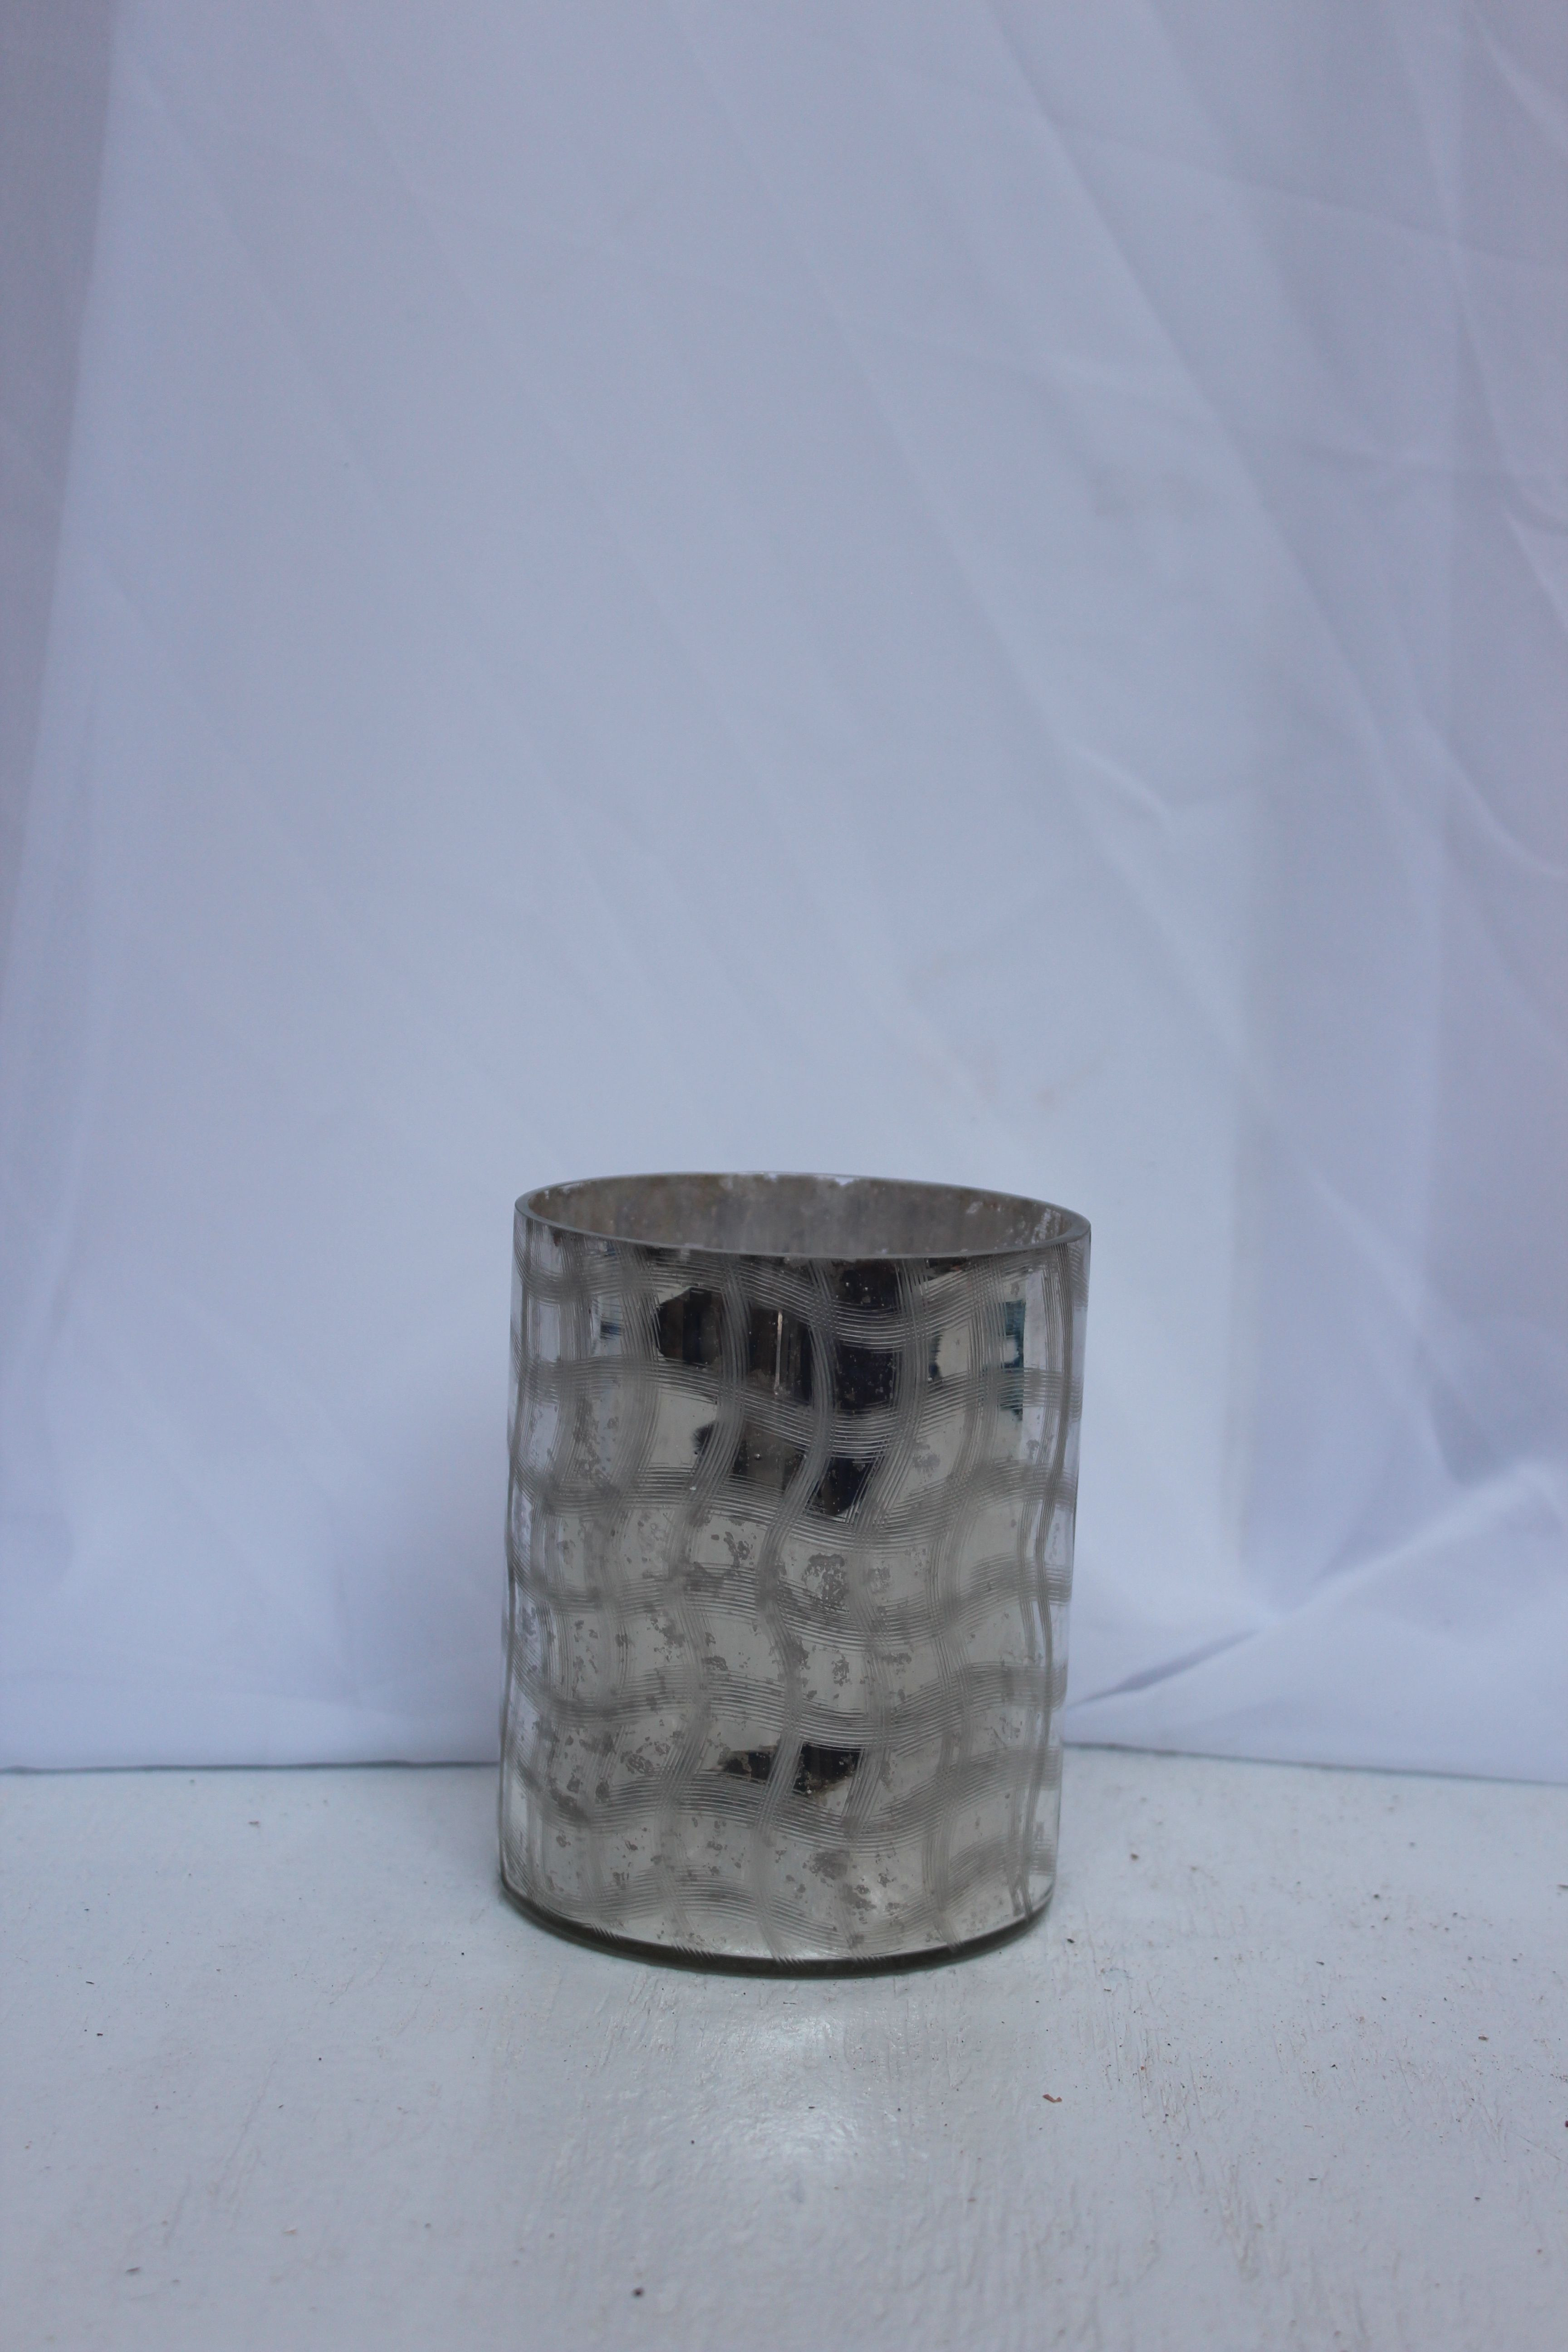 3.5 X 6 Cylinder Vase Of Mercury Glass Cylinder with Wavy Checked Etching Pattern Showroom with Mercury Glass Cylinder with Wavy Checked Etching Pattern